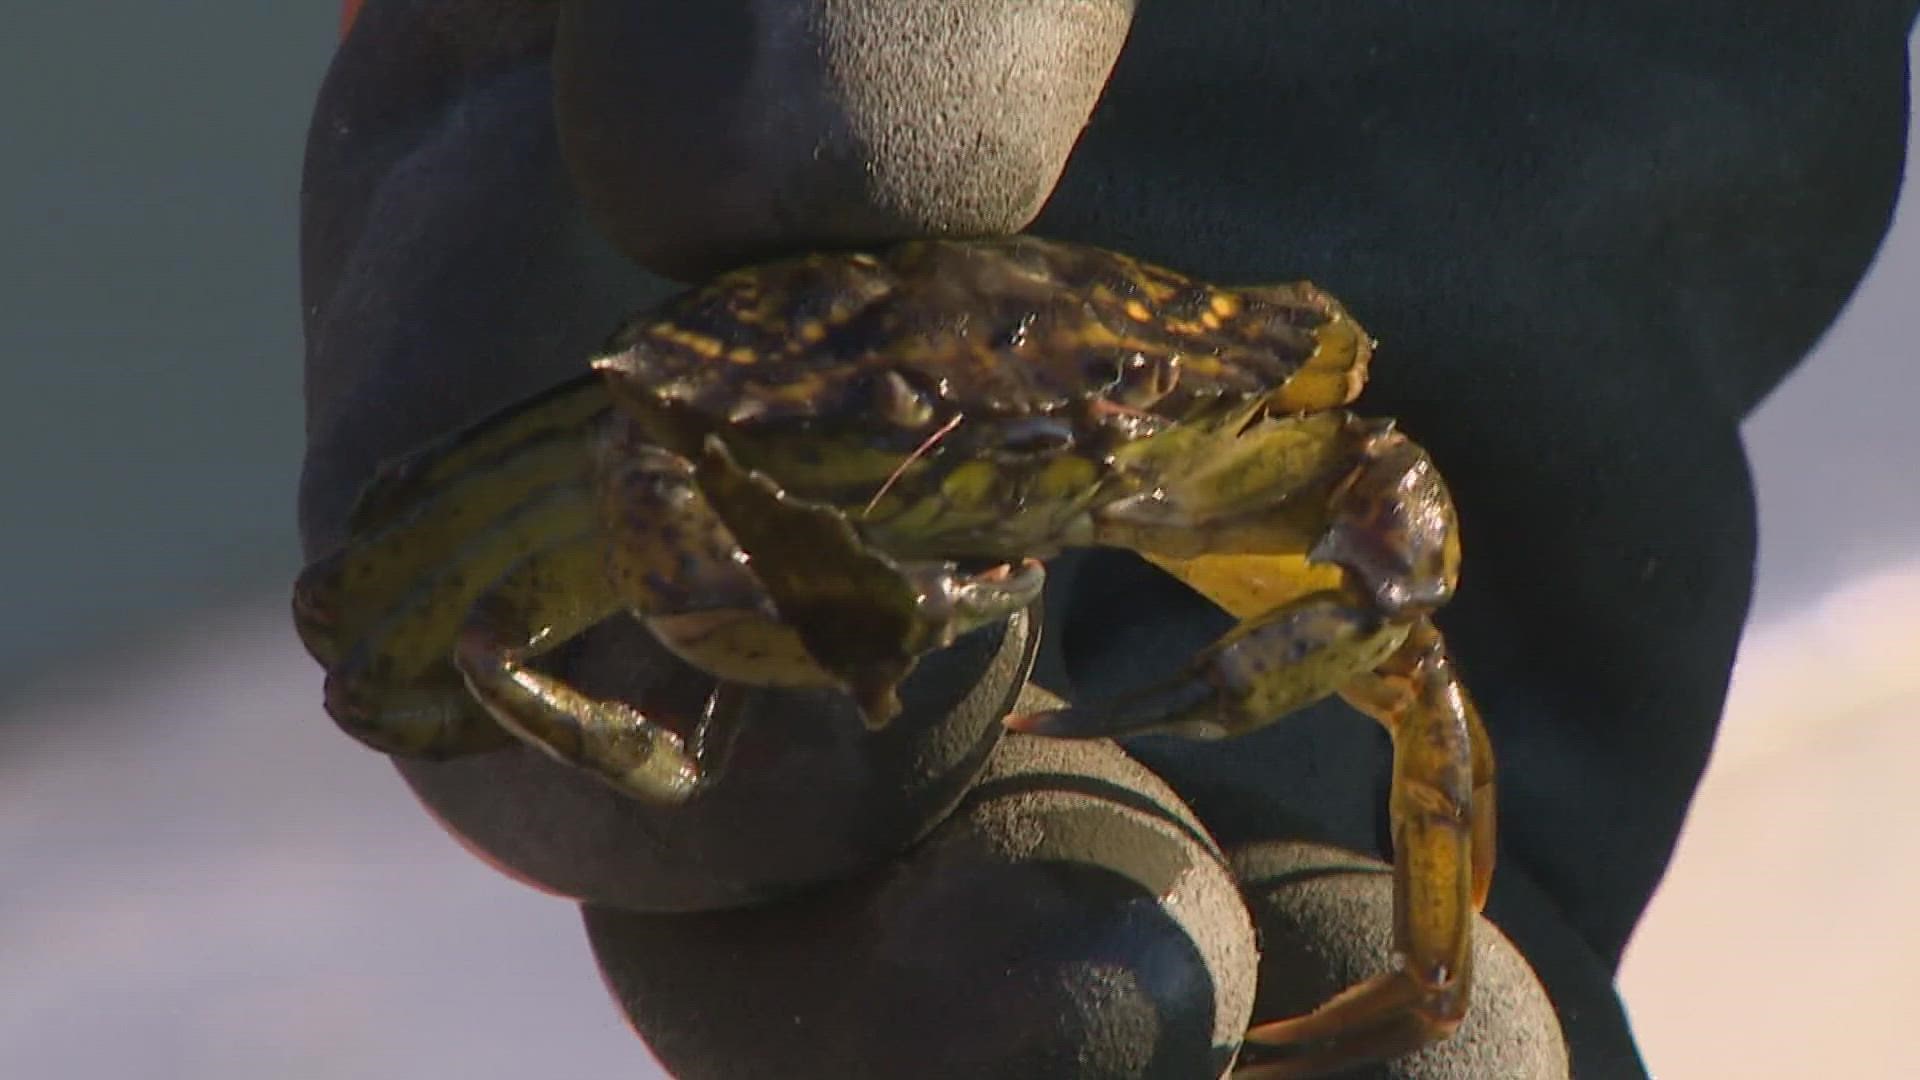 Washington's European green crab population has exploded in recent years.